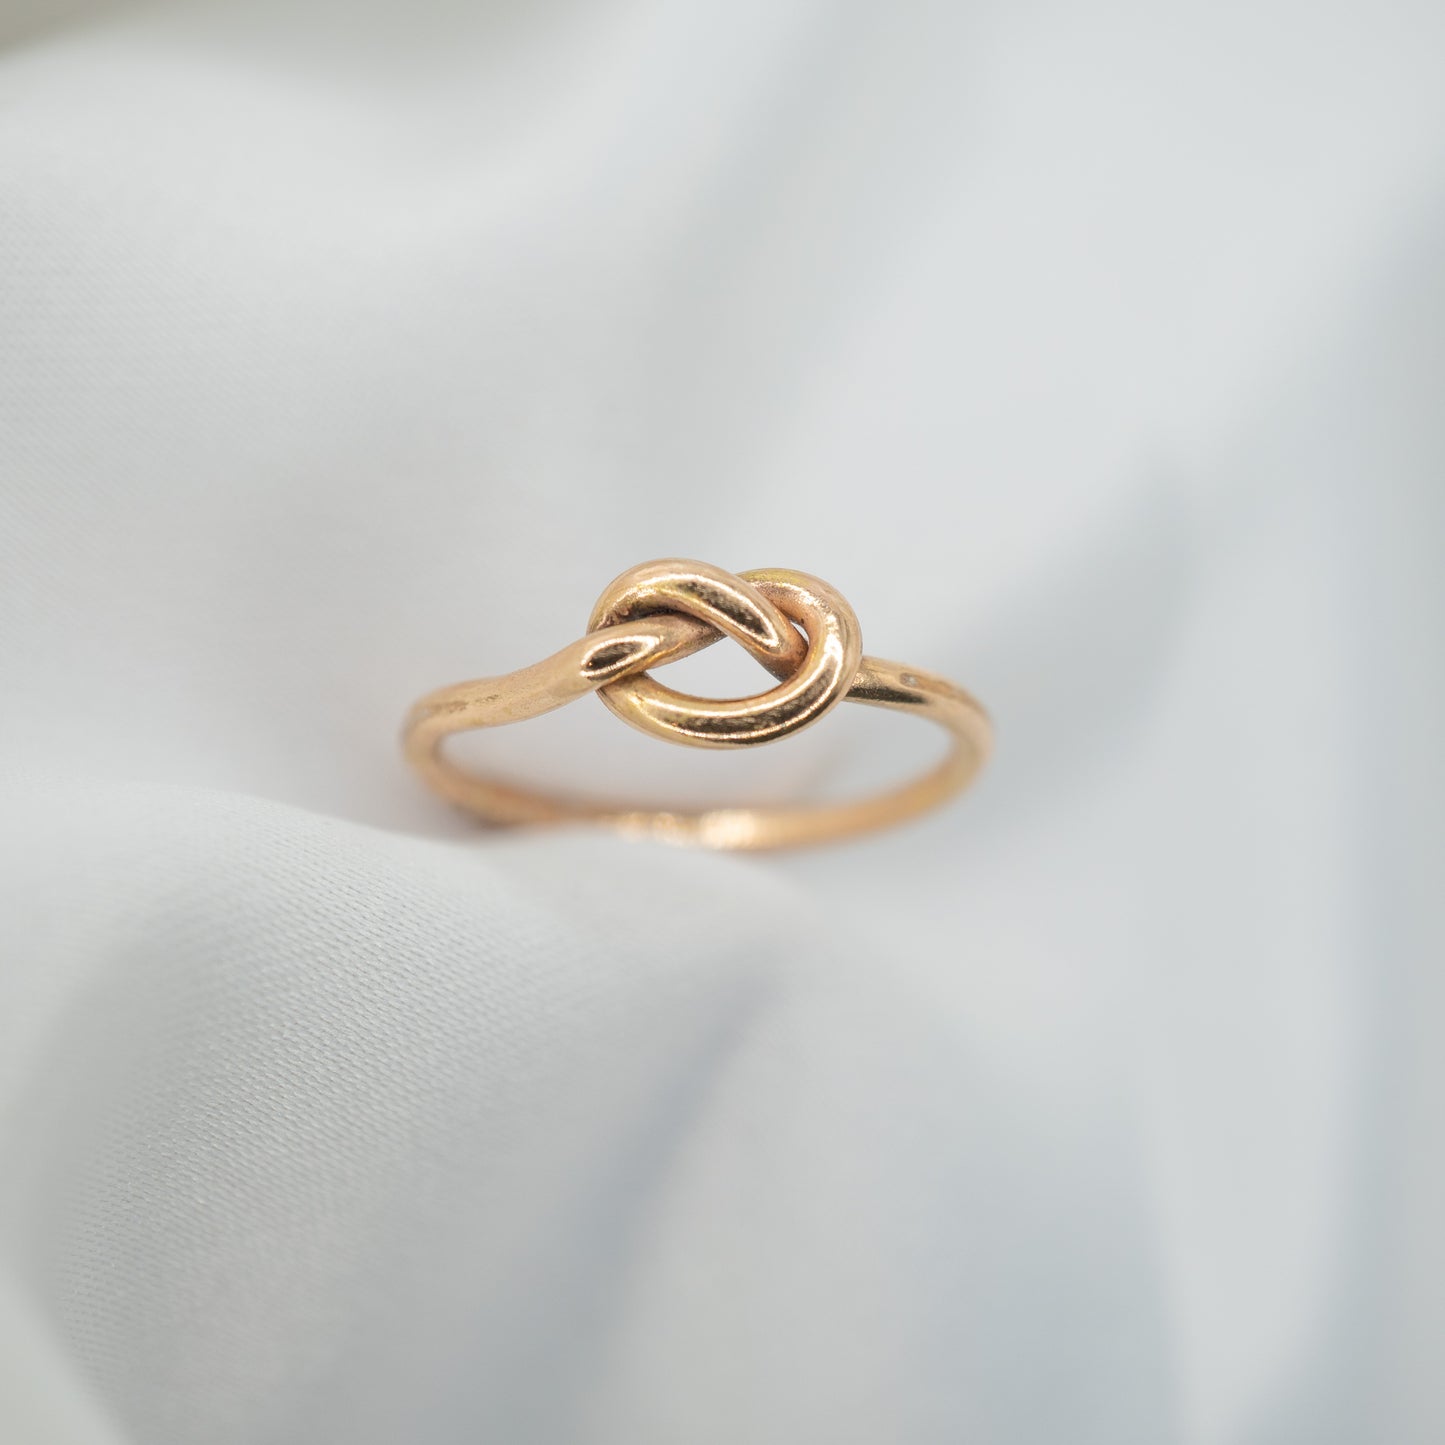 Gold Filled Knot Ring - shot on white - aerial view